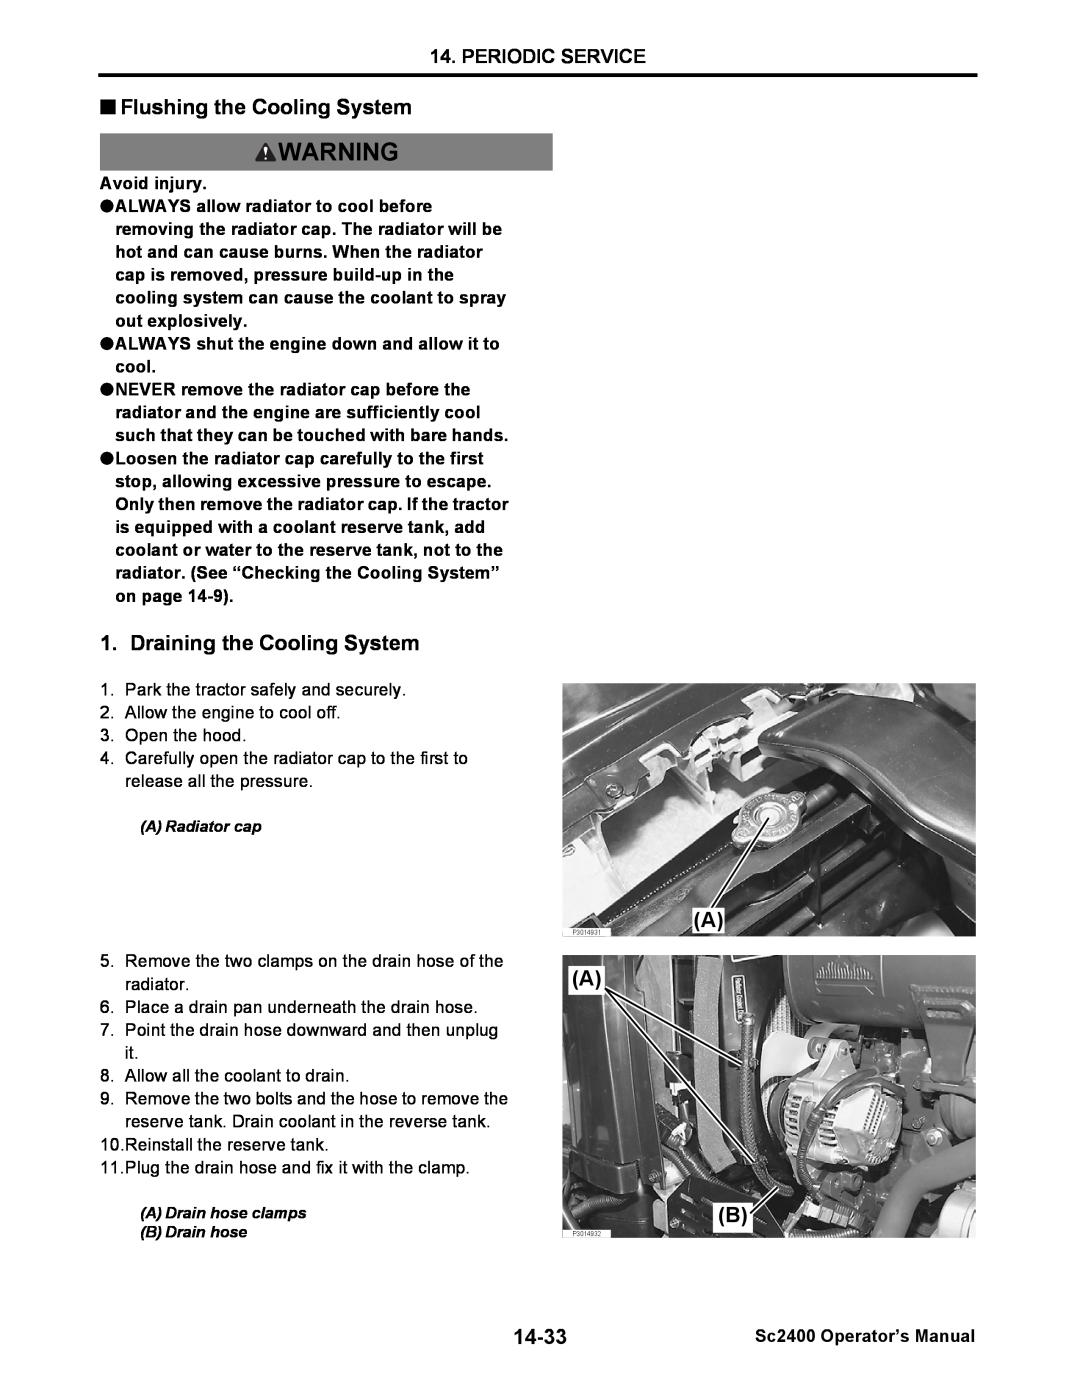 Cub Cadet SC2400 manual Periodic Service, 14-33, Avoid injury, ALWAYS shut the engine down and allow it to cool 